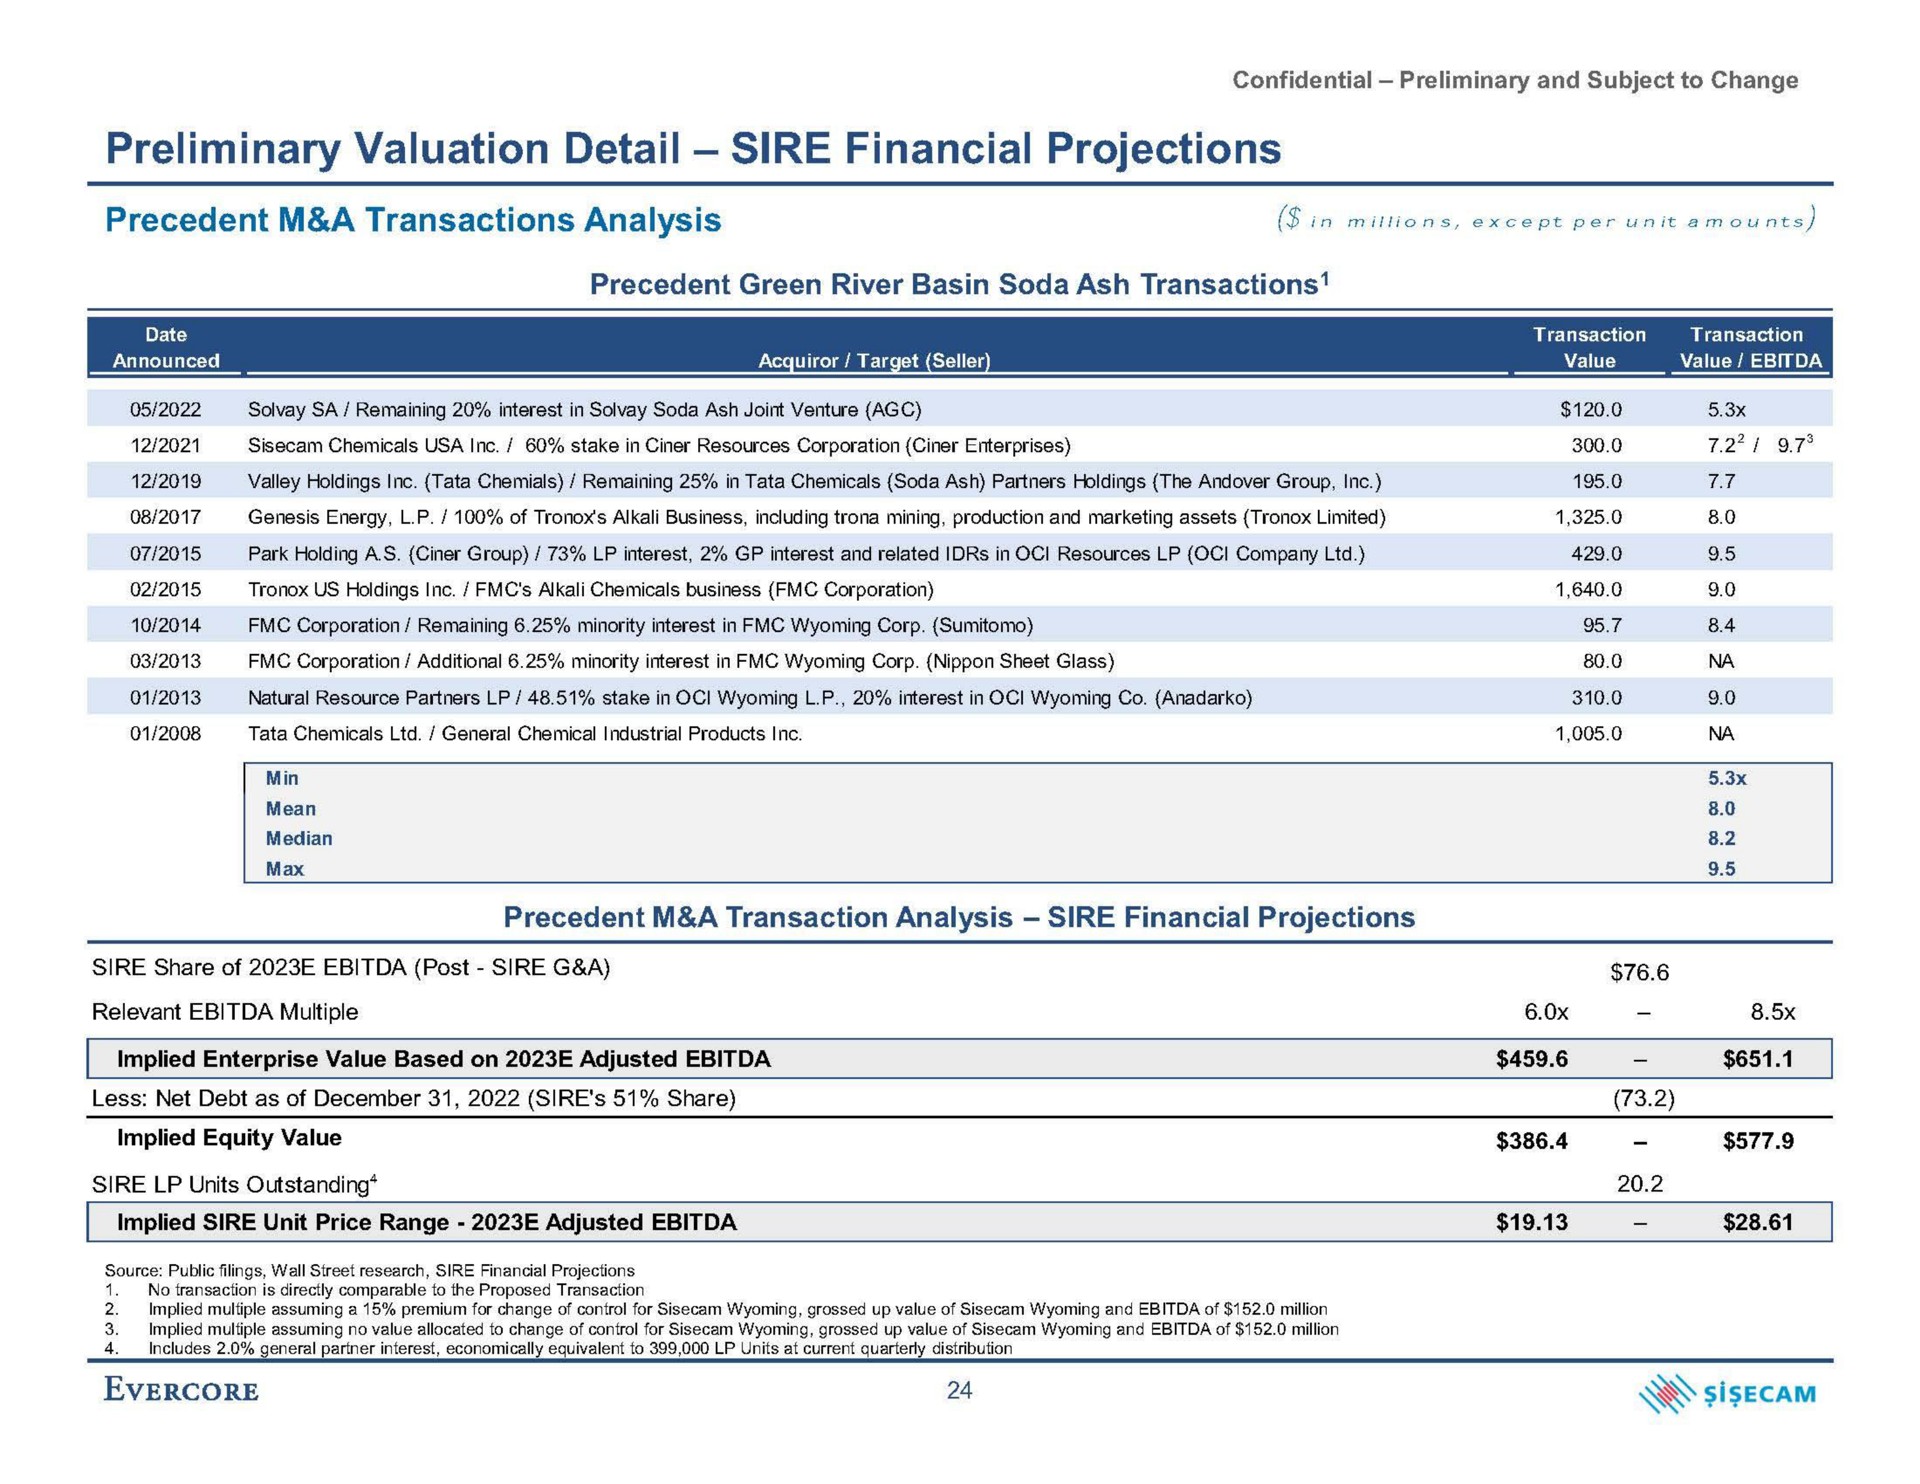 preliminary valuation detail sire financial projections precedent a transactions analysis in minions except per unit amounts | Evercore